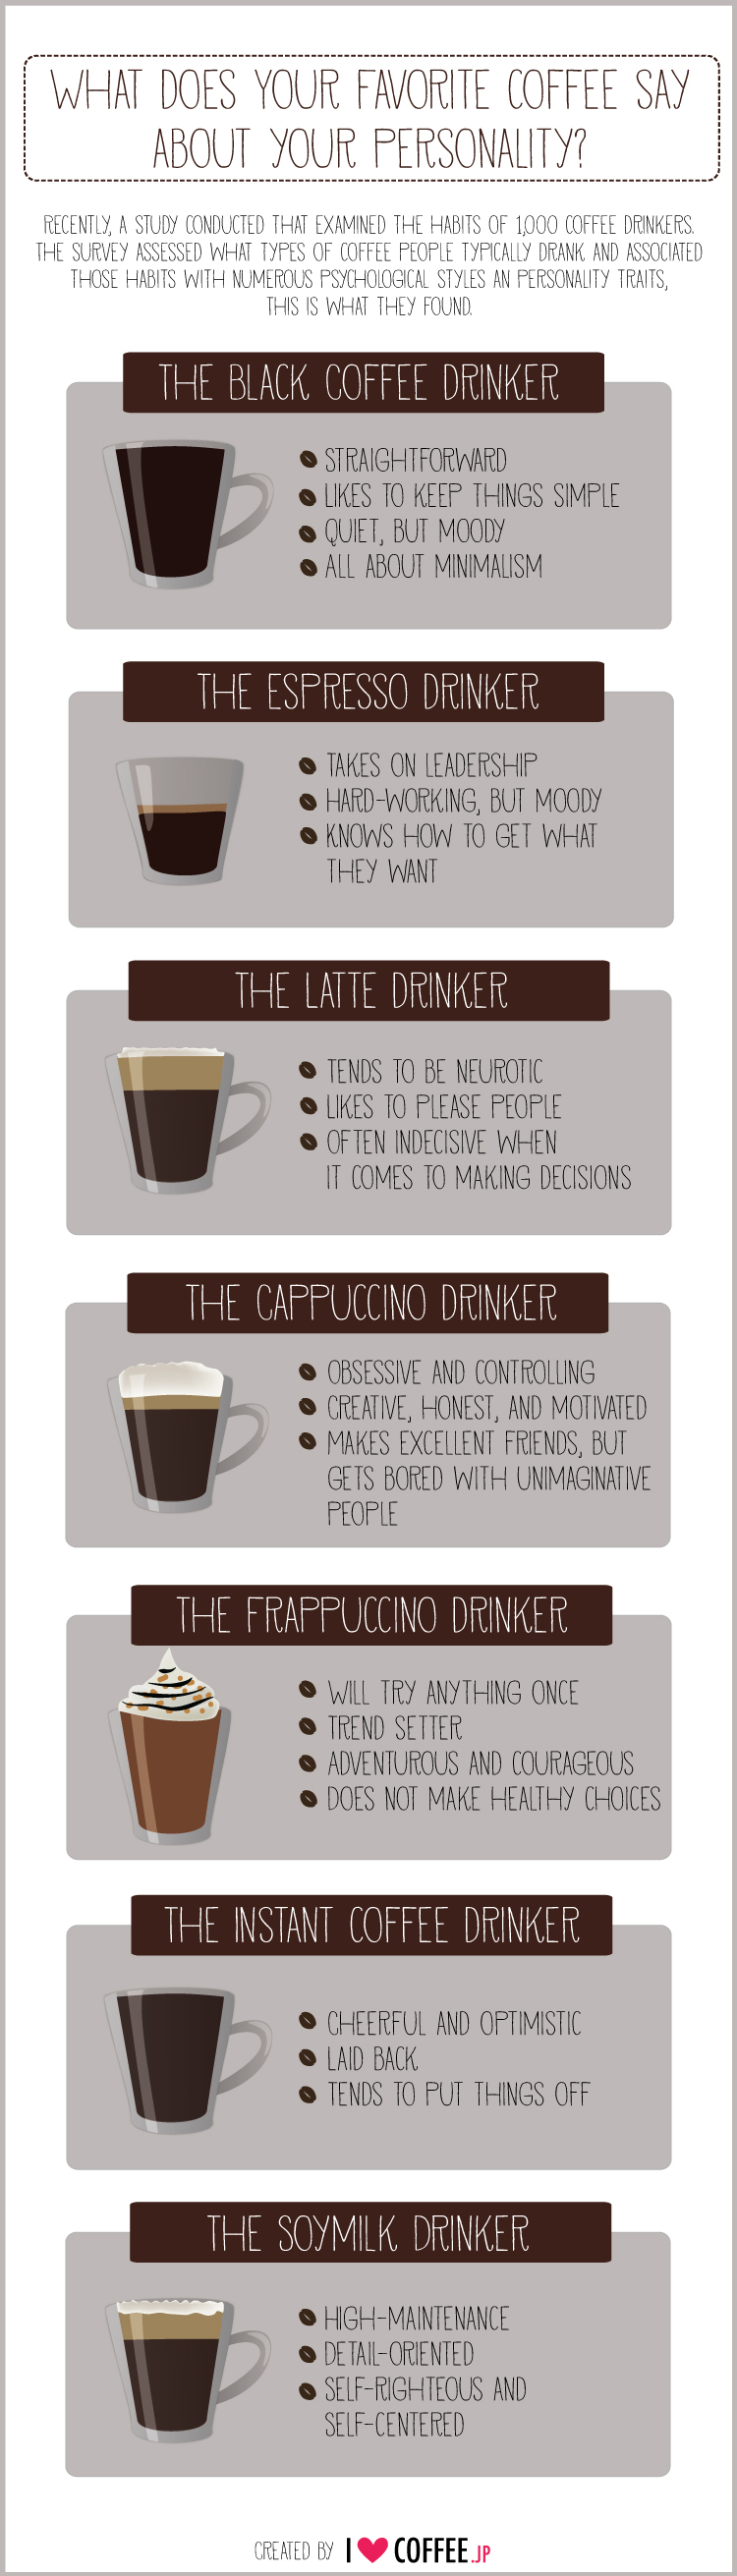 Exploring English - coffee personality test